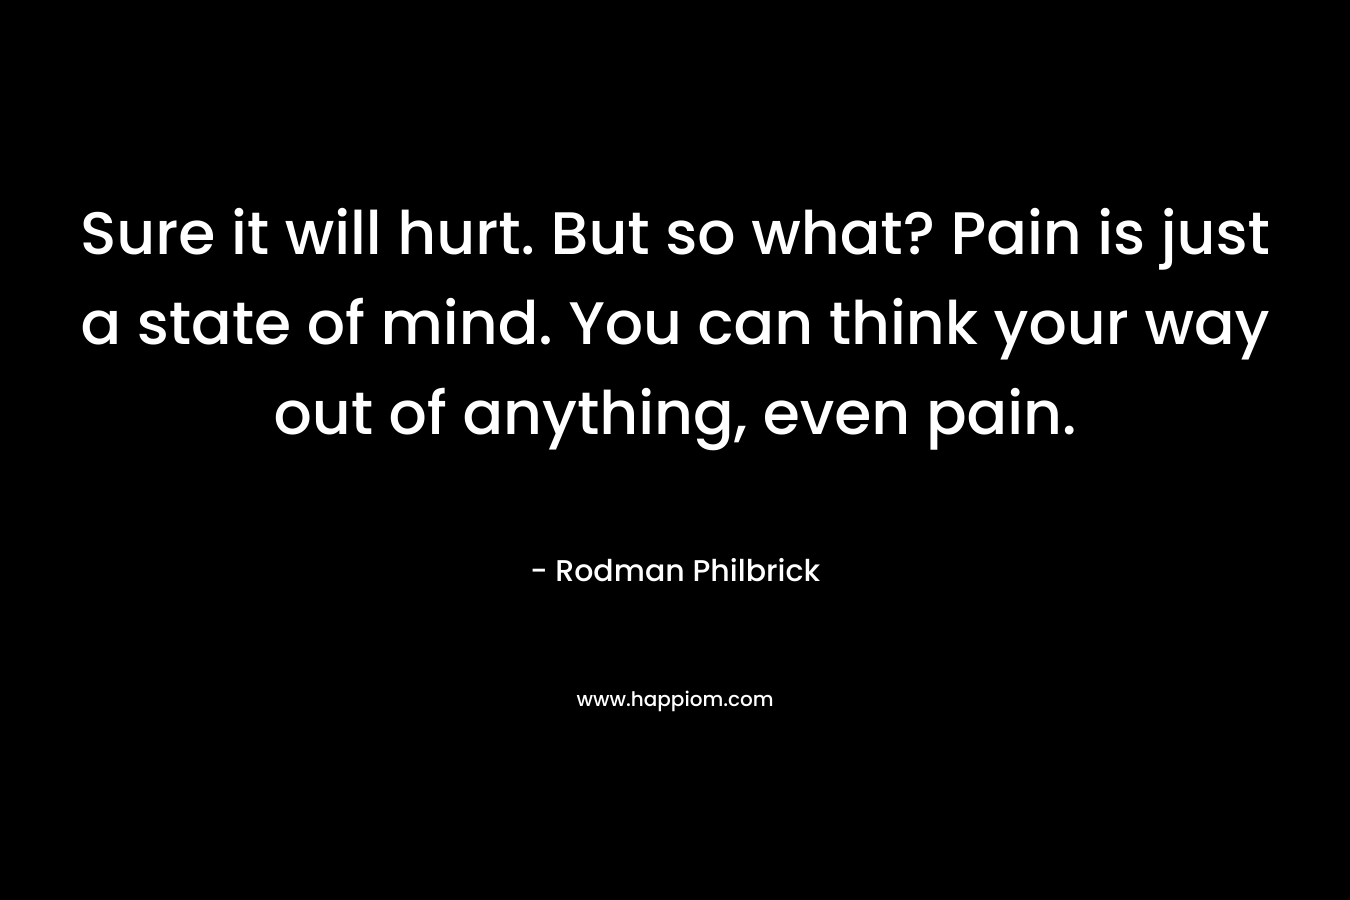 Sure it will hurt. But so what? Pain is just a state of mind. You can think your way out of anything, even pain.